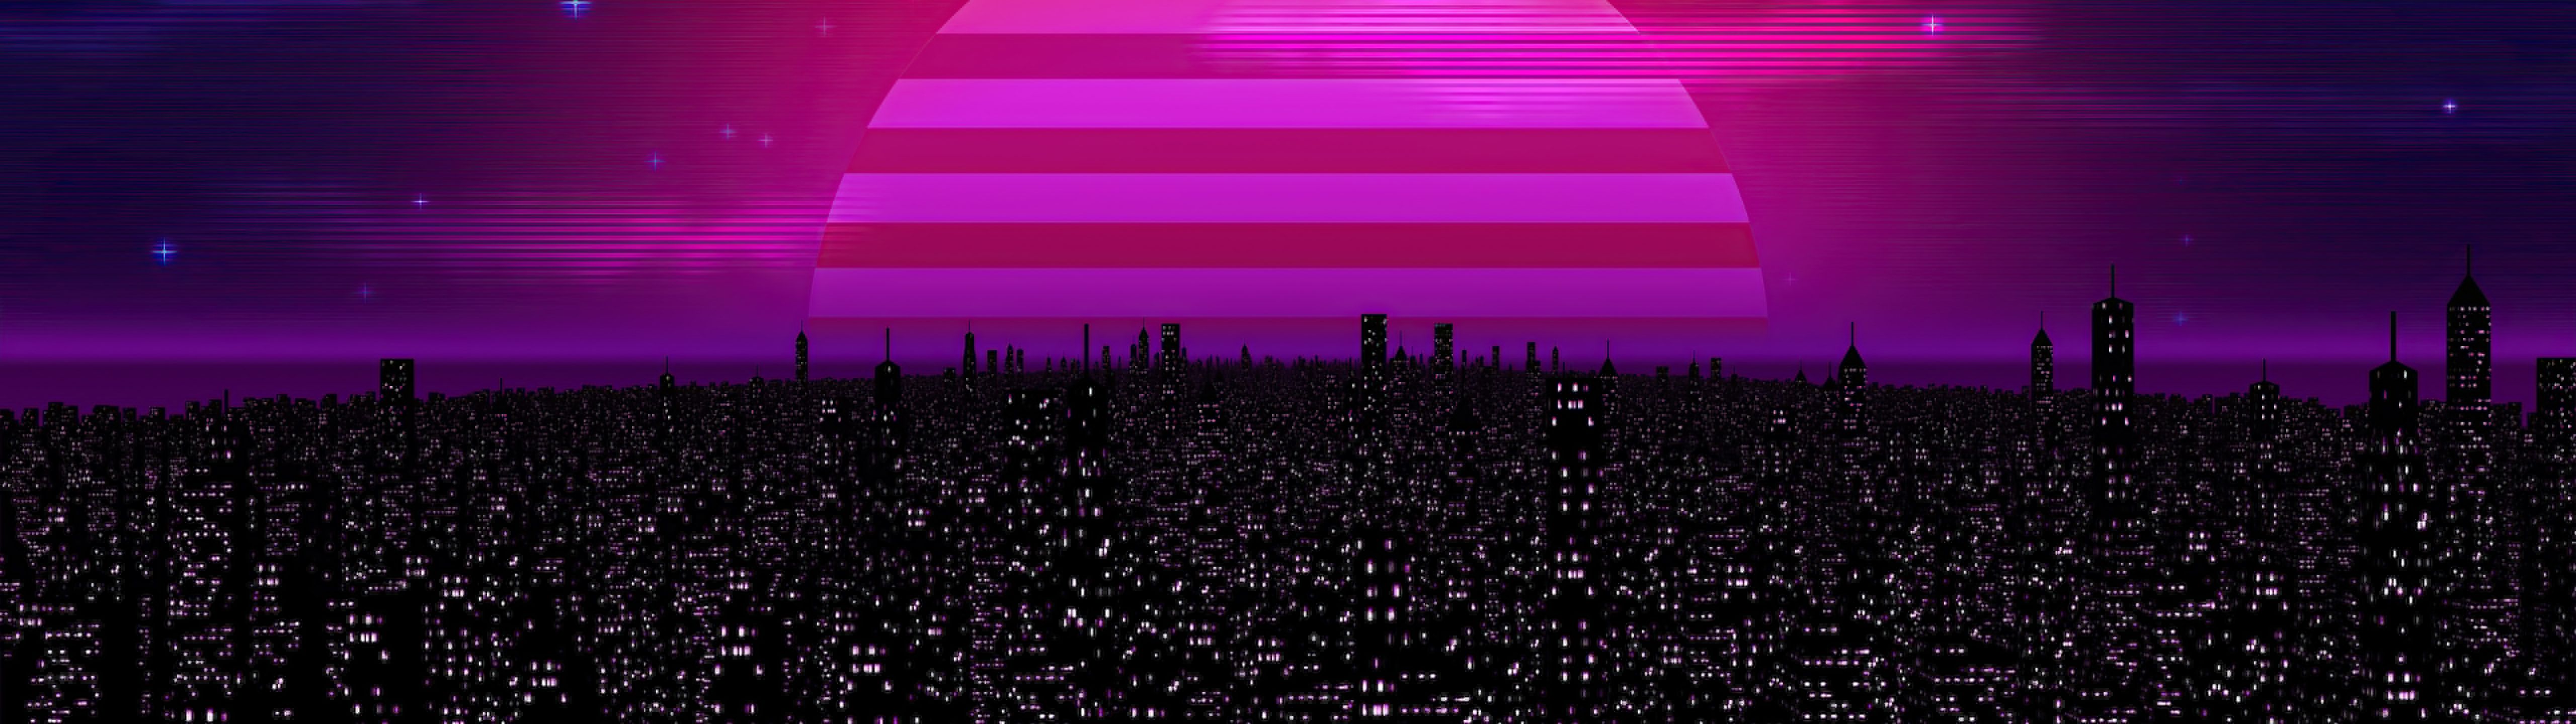 80s synthwave aesthetic wallpaper with a city and sunset - 5120x1440